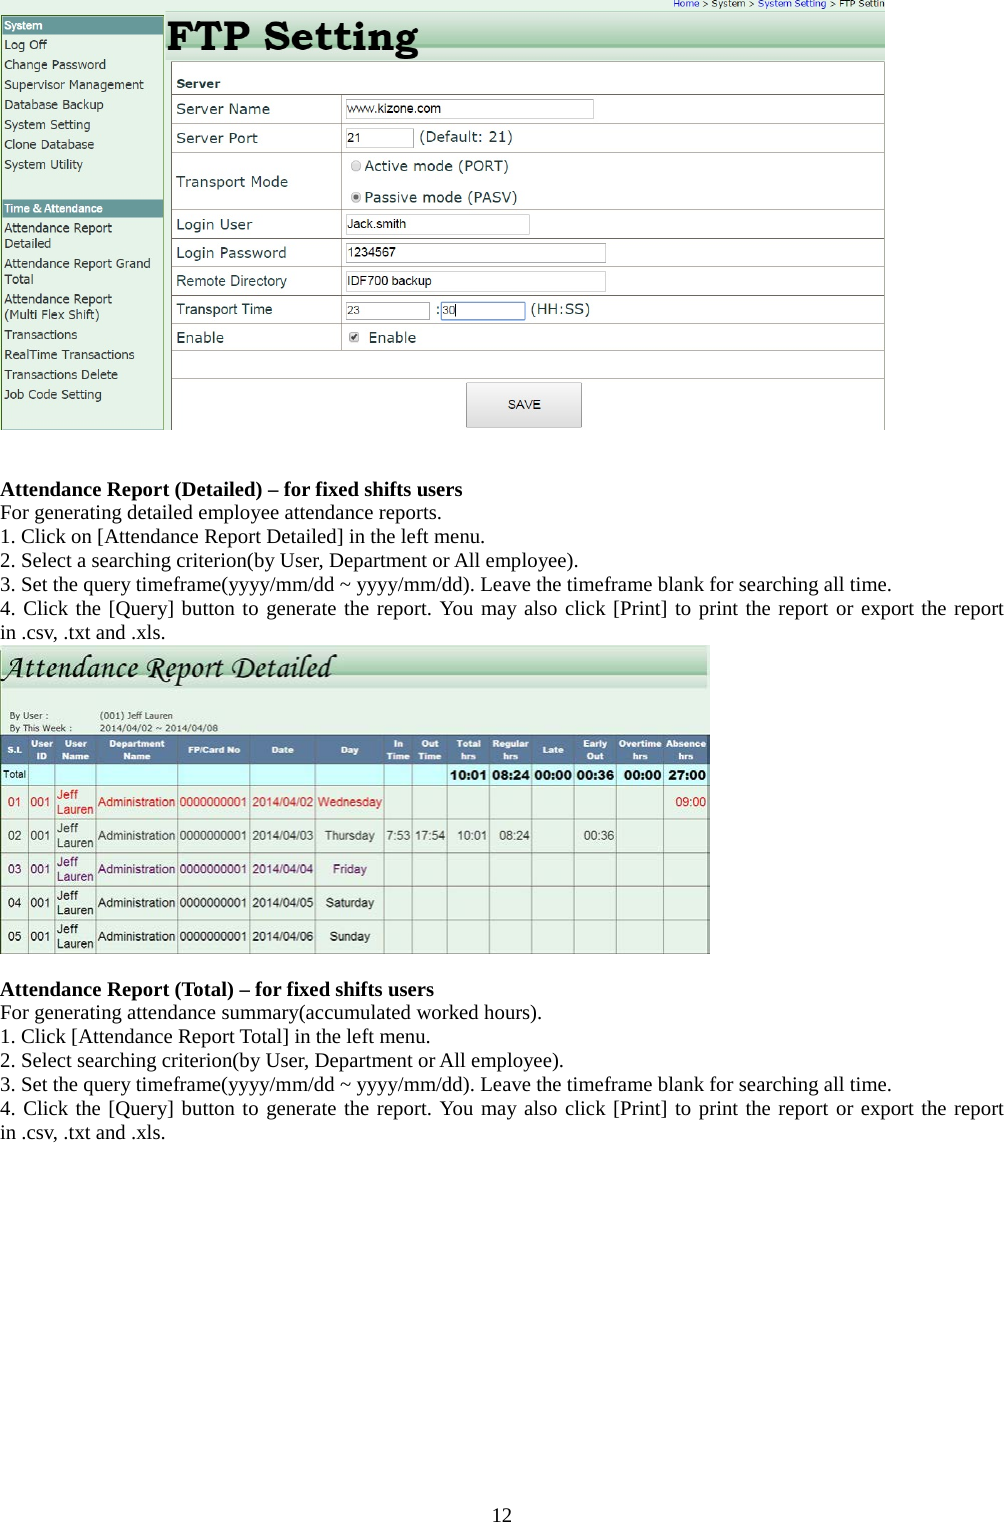  12    Attendance Report (Detailed) – for fixed shifts users For generating detailed employee attendance reports. 1. Click on [Attendance Report Detailed] in the left menu. 2. Select a searching criterion(by User, Department or All employee). 3. Set the query timeframe(yyyy/mm/dd ~ yyyy/mm/dd). Leave the timeframe blank for searching all time. 4. Click the [Query] button to generate the report. You may also click [Print] to print the report or export the report in .csv, .txt and .xls.   Attendance Report (Total) – for fixed shifts users For generating attendance summary(accumulated worked hours). 1. Click [Attendance Report Total] in the left menu. 2. Select searching criterion(by User, Department or All employee). 3. Set the query timeframe(yyyy/mm/dd ~ yyyy/mm/dd). Leave the timeframe blank for searching all time. 4. Click the [Query] button to generate the report. You may also click [Print] to print the report or export the report in .csv, .txt and .xls. 